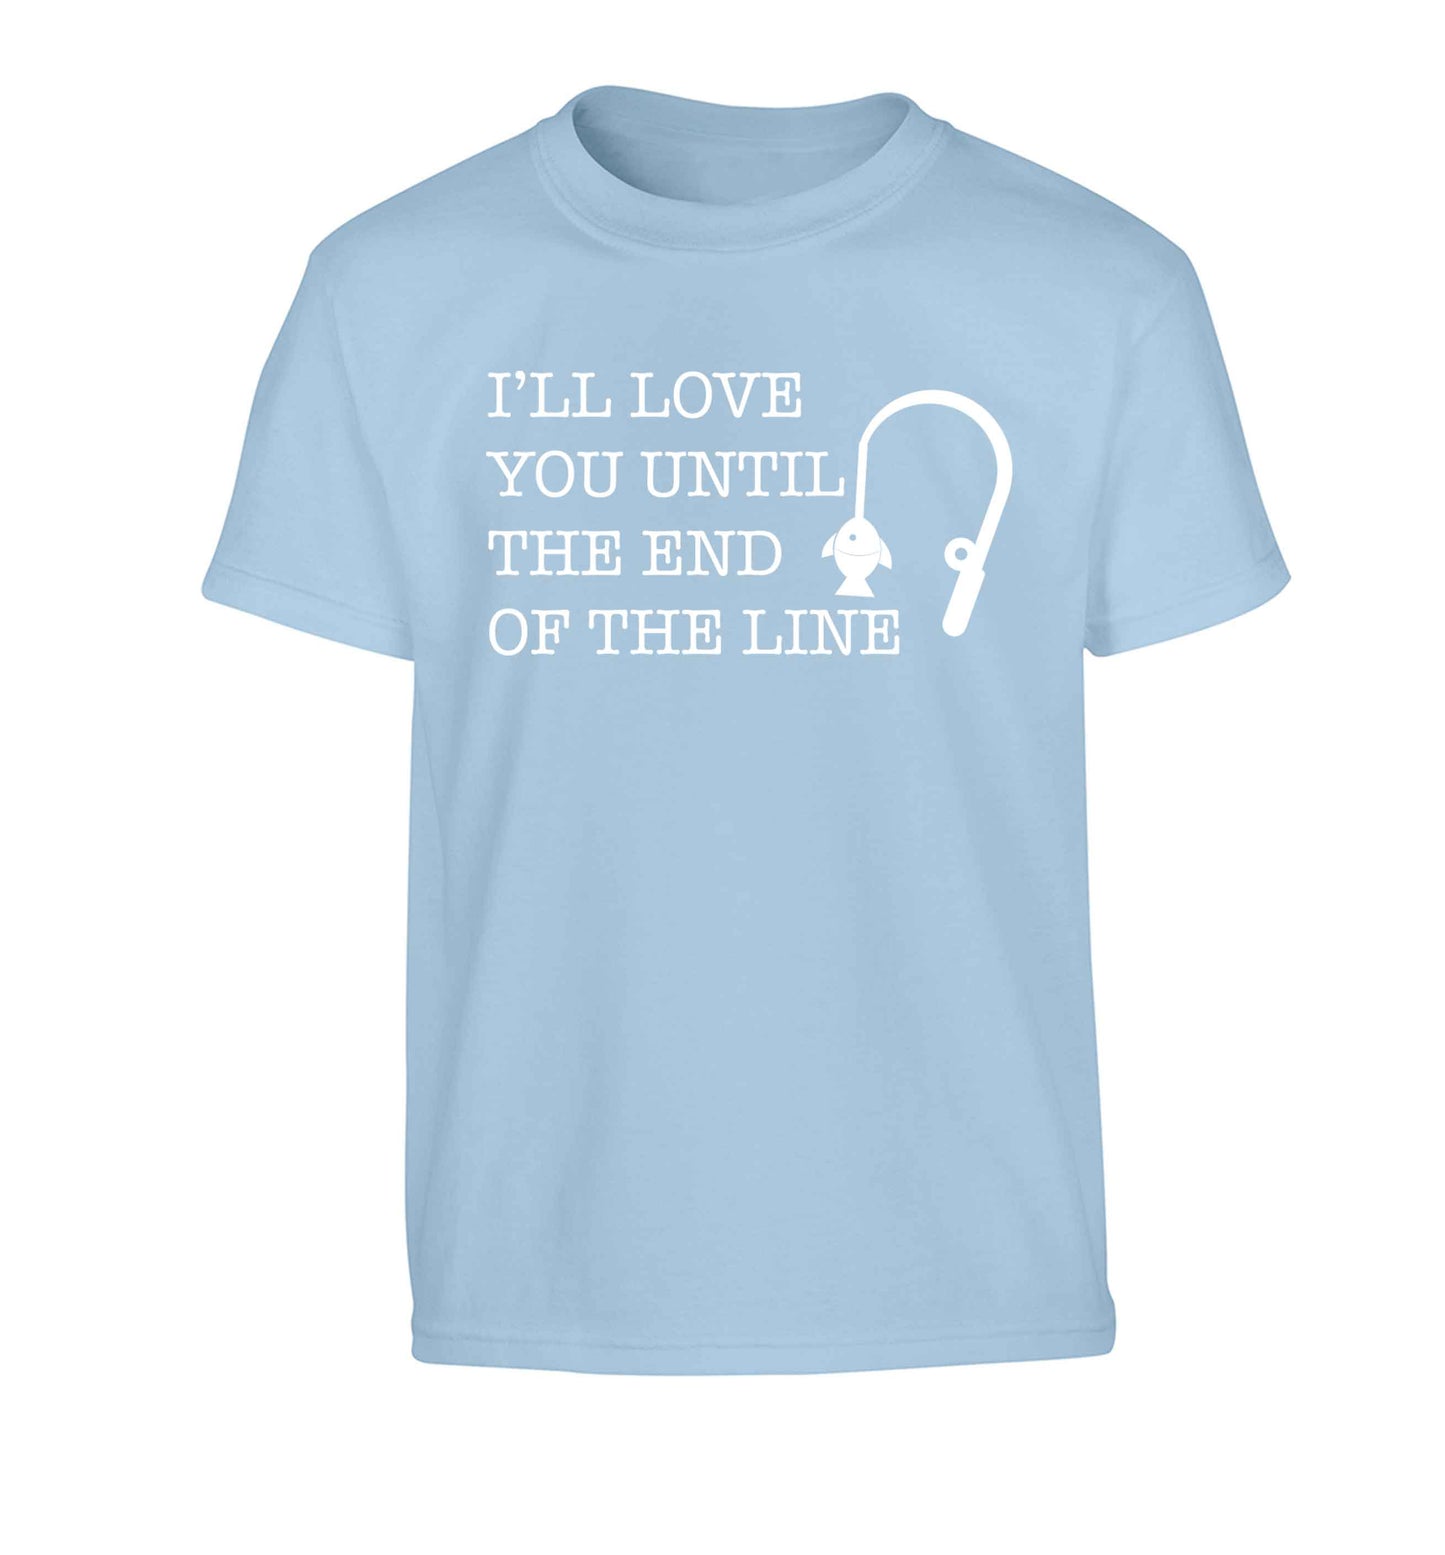 I'll love you until the end of the line Children's light blue Tshirt 12-13 Years